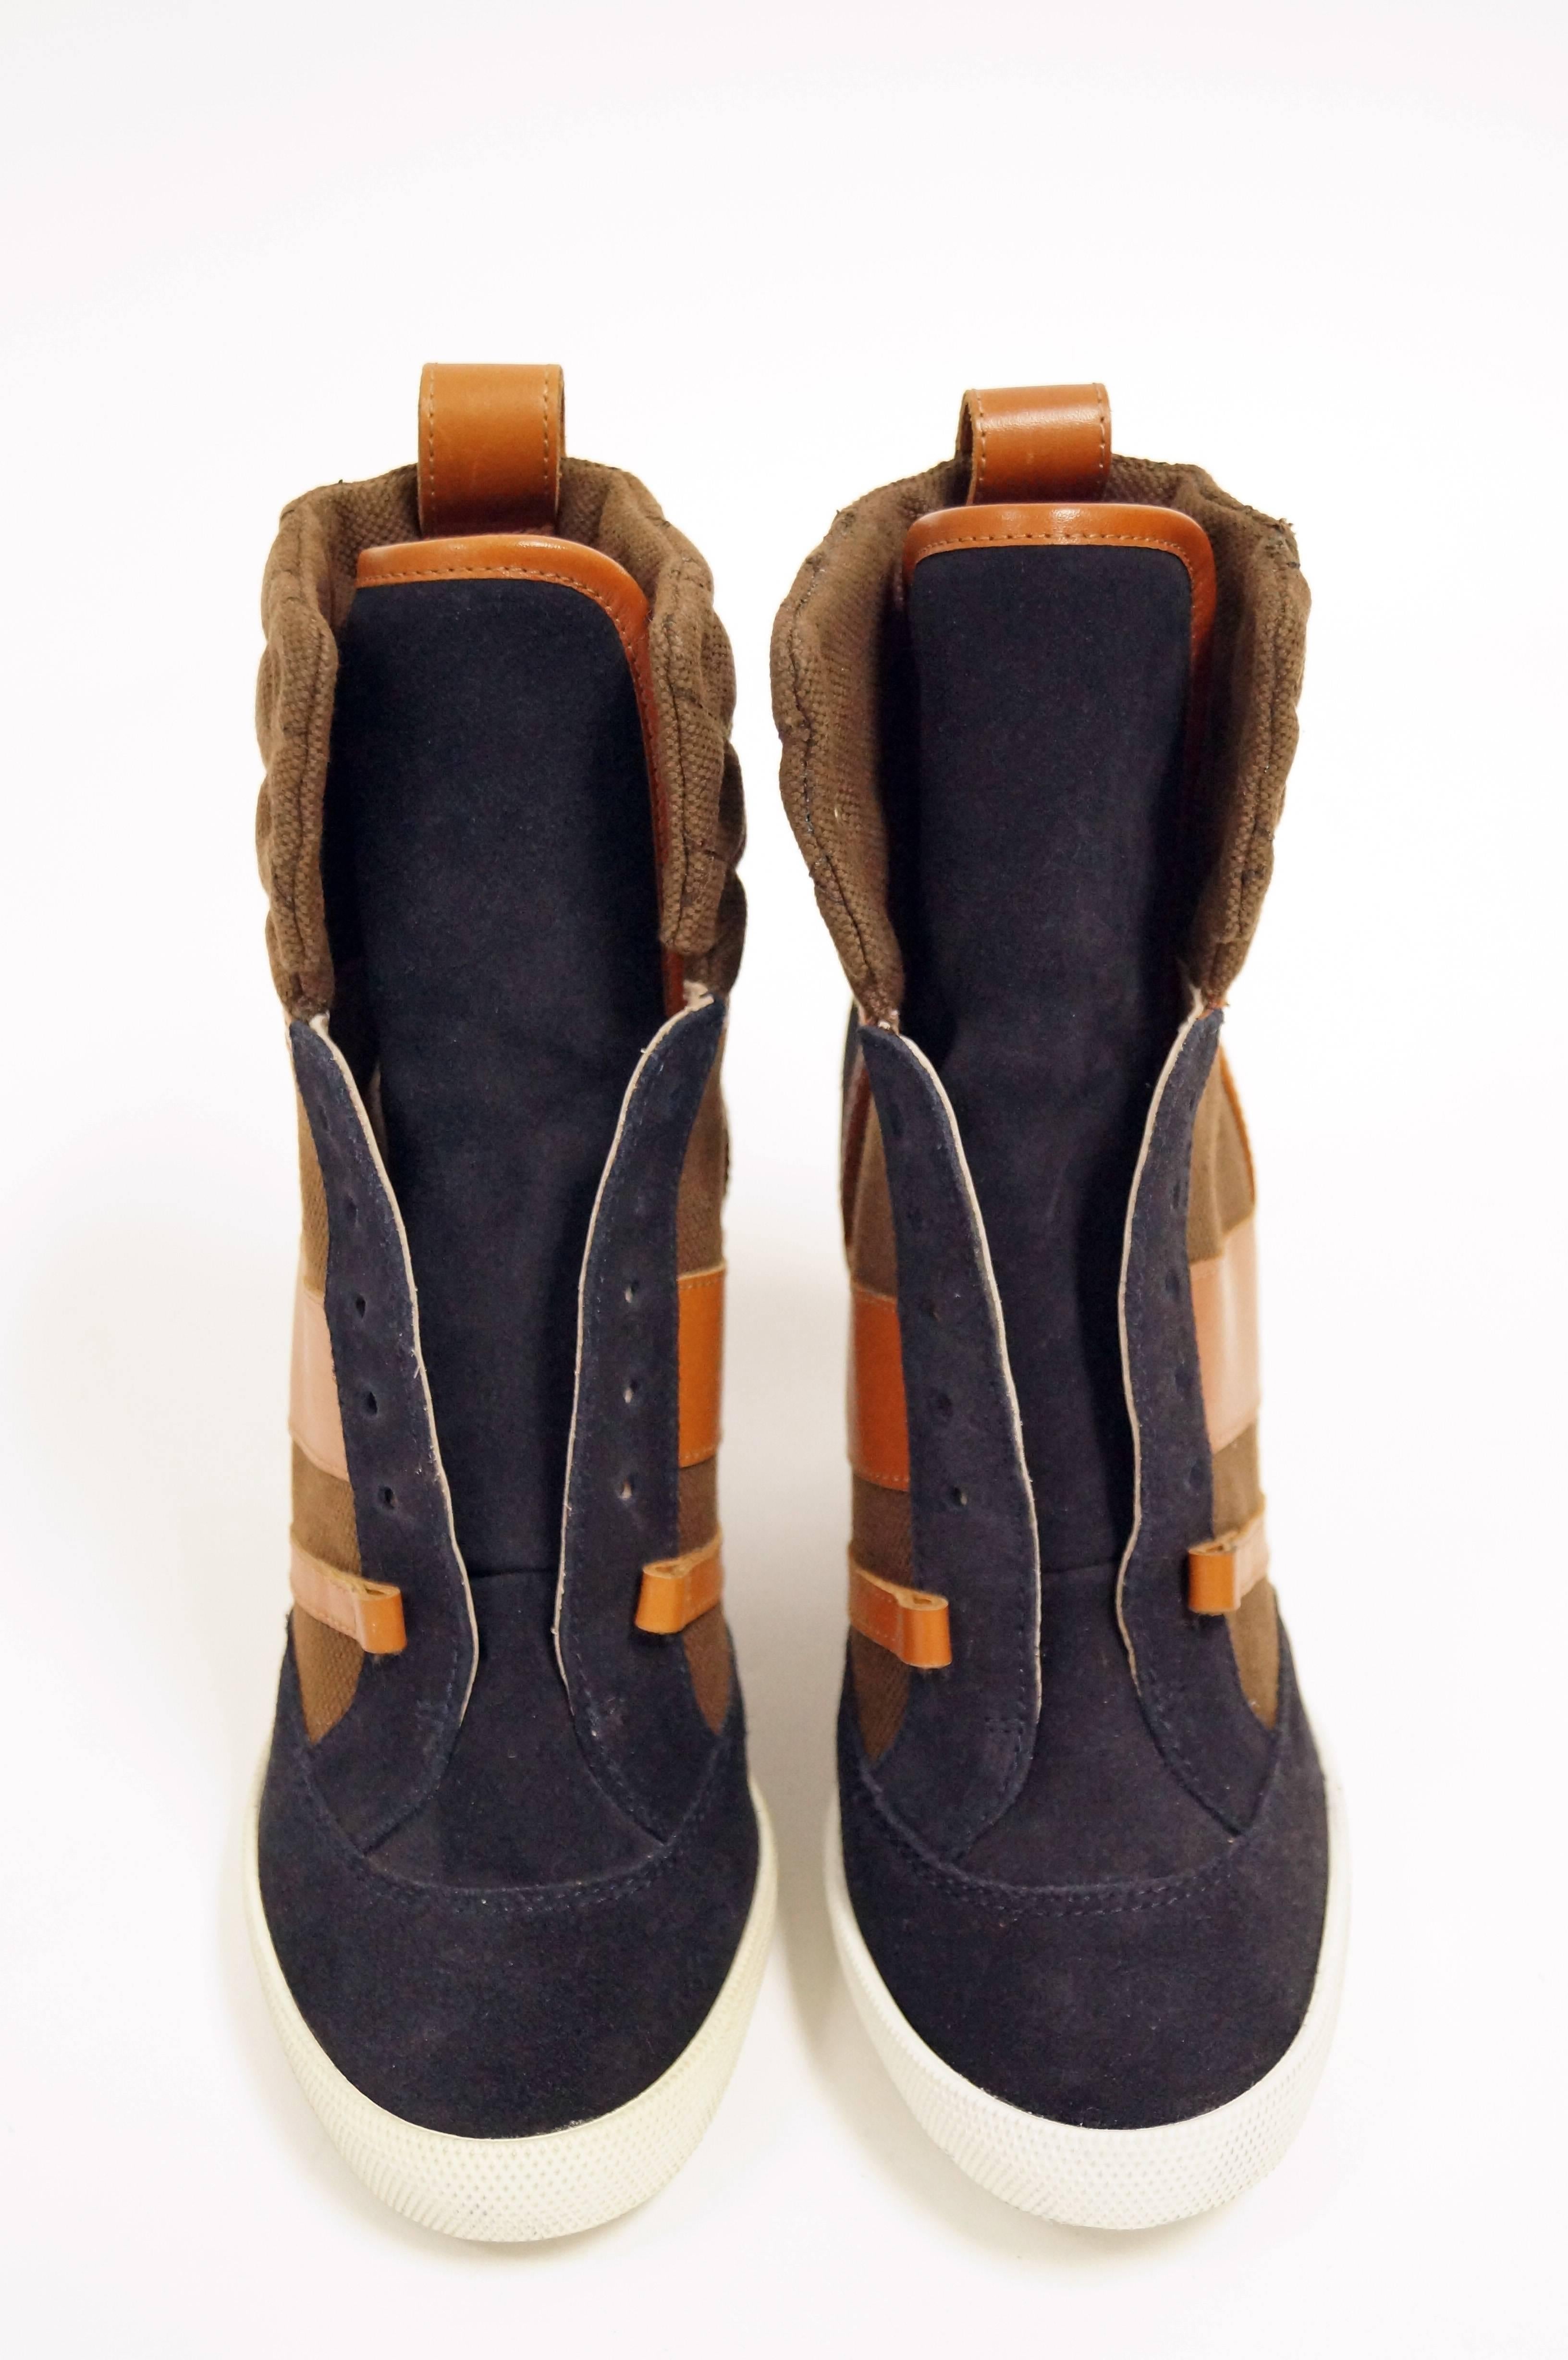 Contemporary wedge sneakers shoes by Chloe in complementary navy blue and orange. The sneakers feature a high collar and tongue, with laces reaching from the toe to the ankle. Wedge, heel, toe, and tongue are covered in navy blue suede. Ankle and